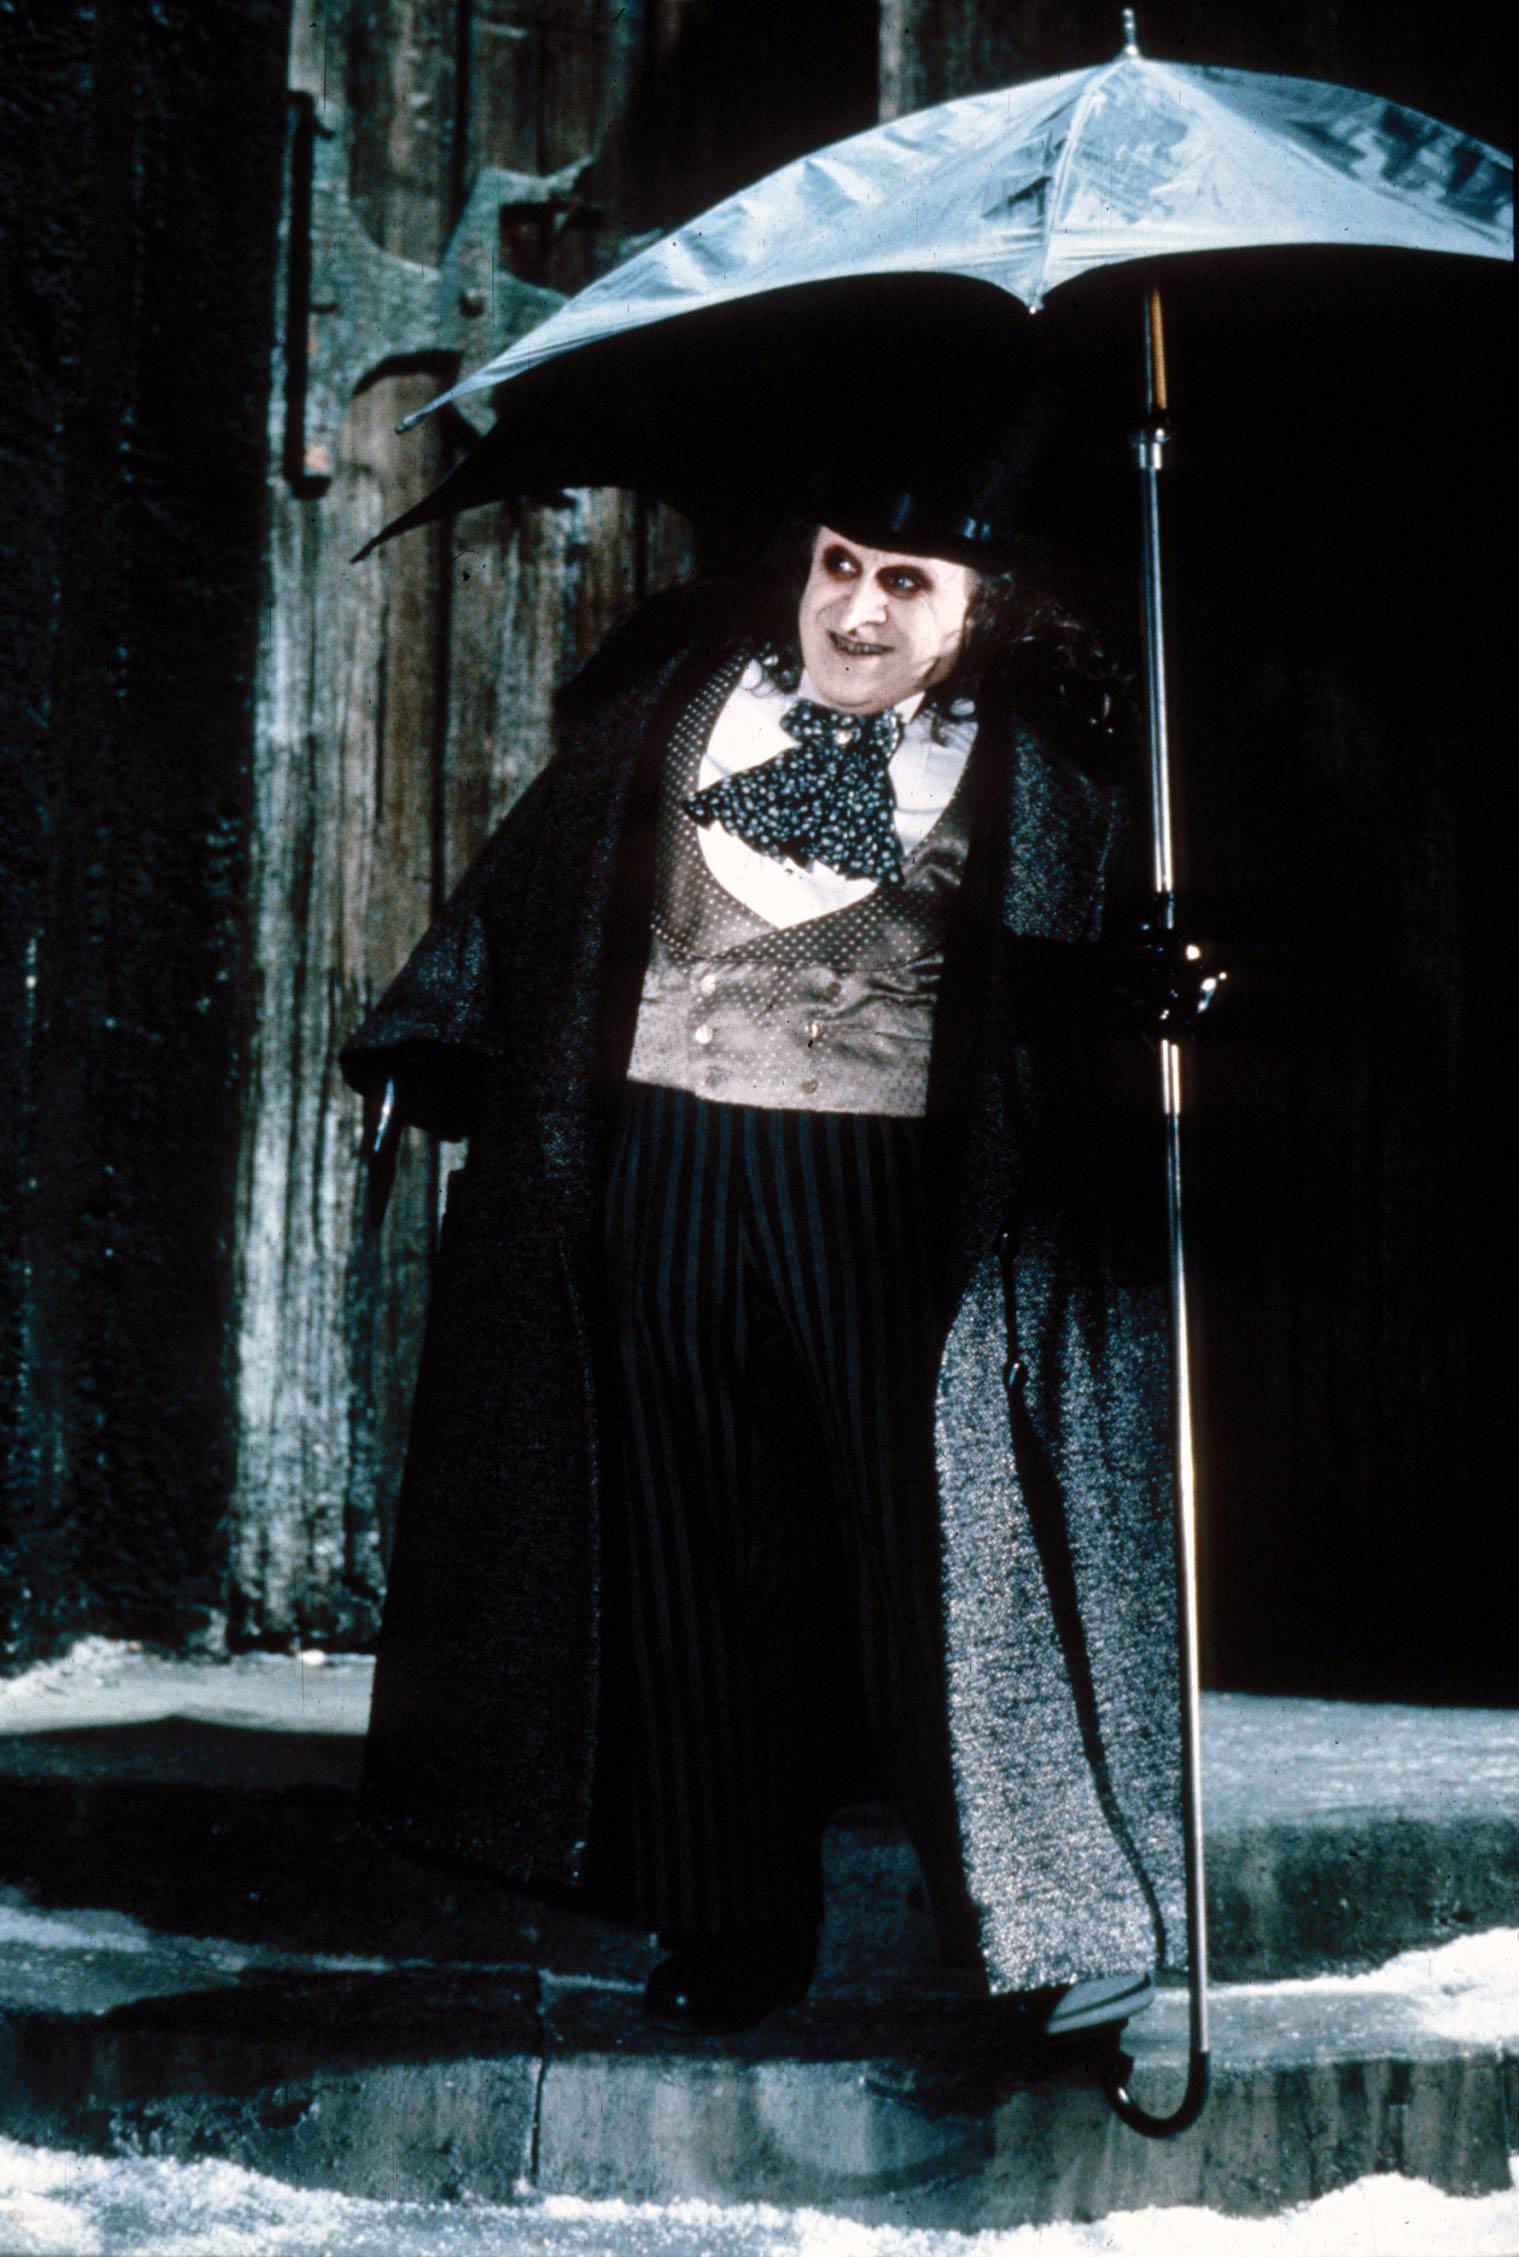 Regardless of your opinions on 'Gotham,' DeVito's Penguin from 'Batman Returns' (1992) remains the most iconic version of the role.